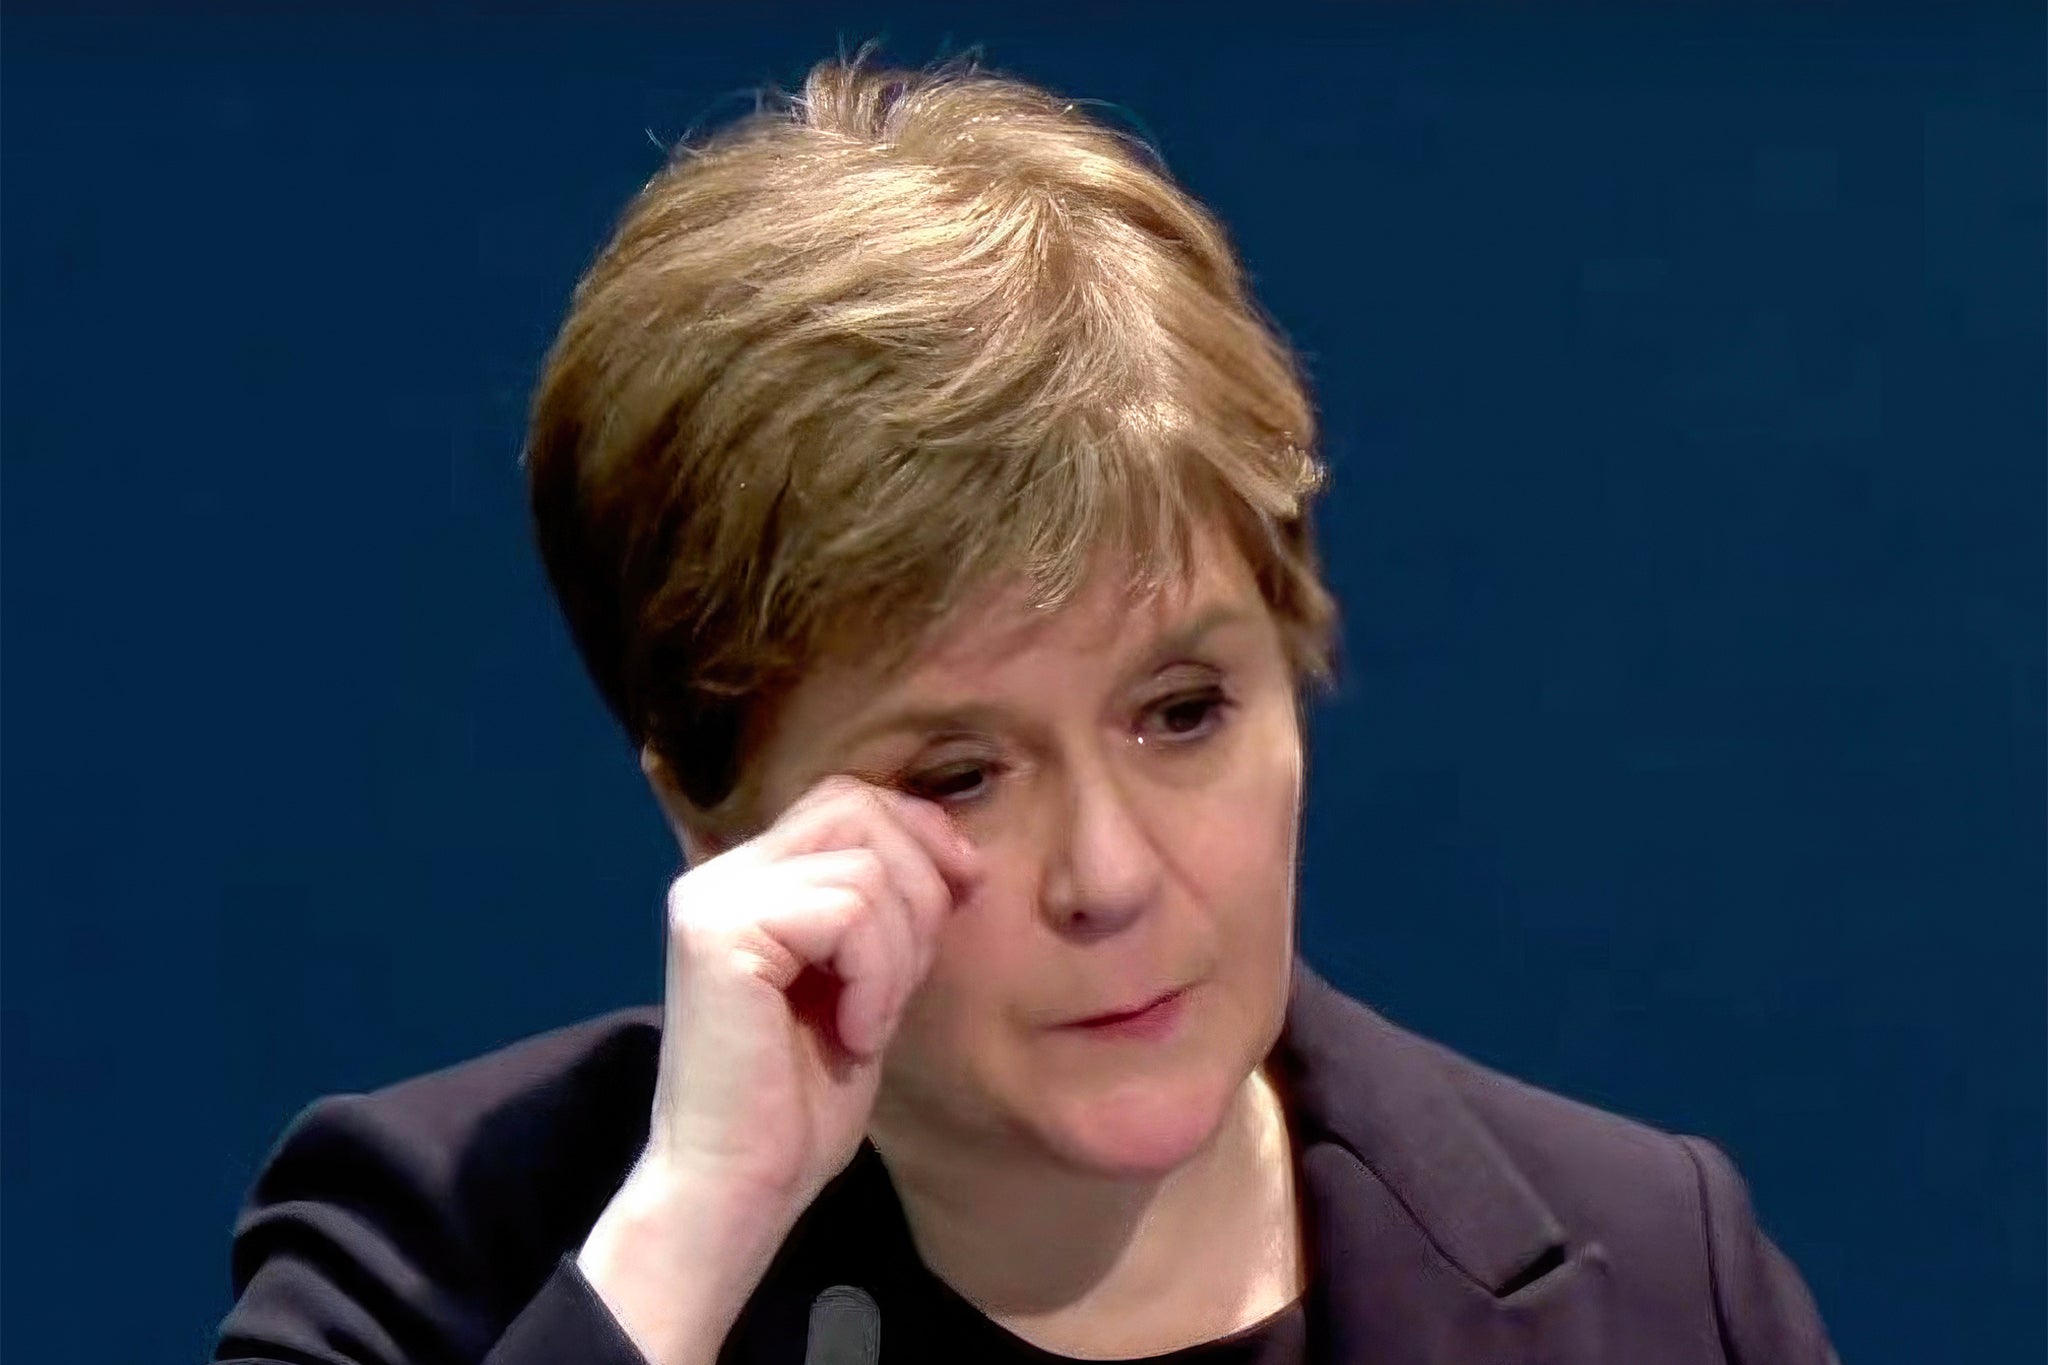 The former first minister of Scotland broke down at one point under questioning during the Covid inquiry in Edinburgh, an uncharacteristic show of emotion